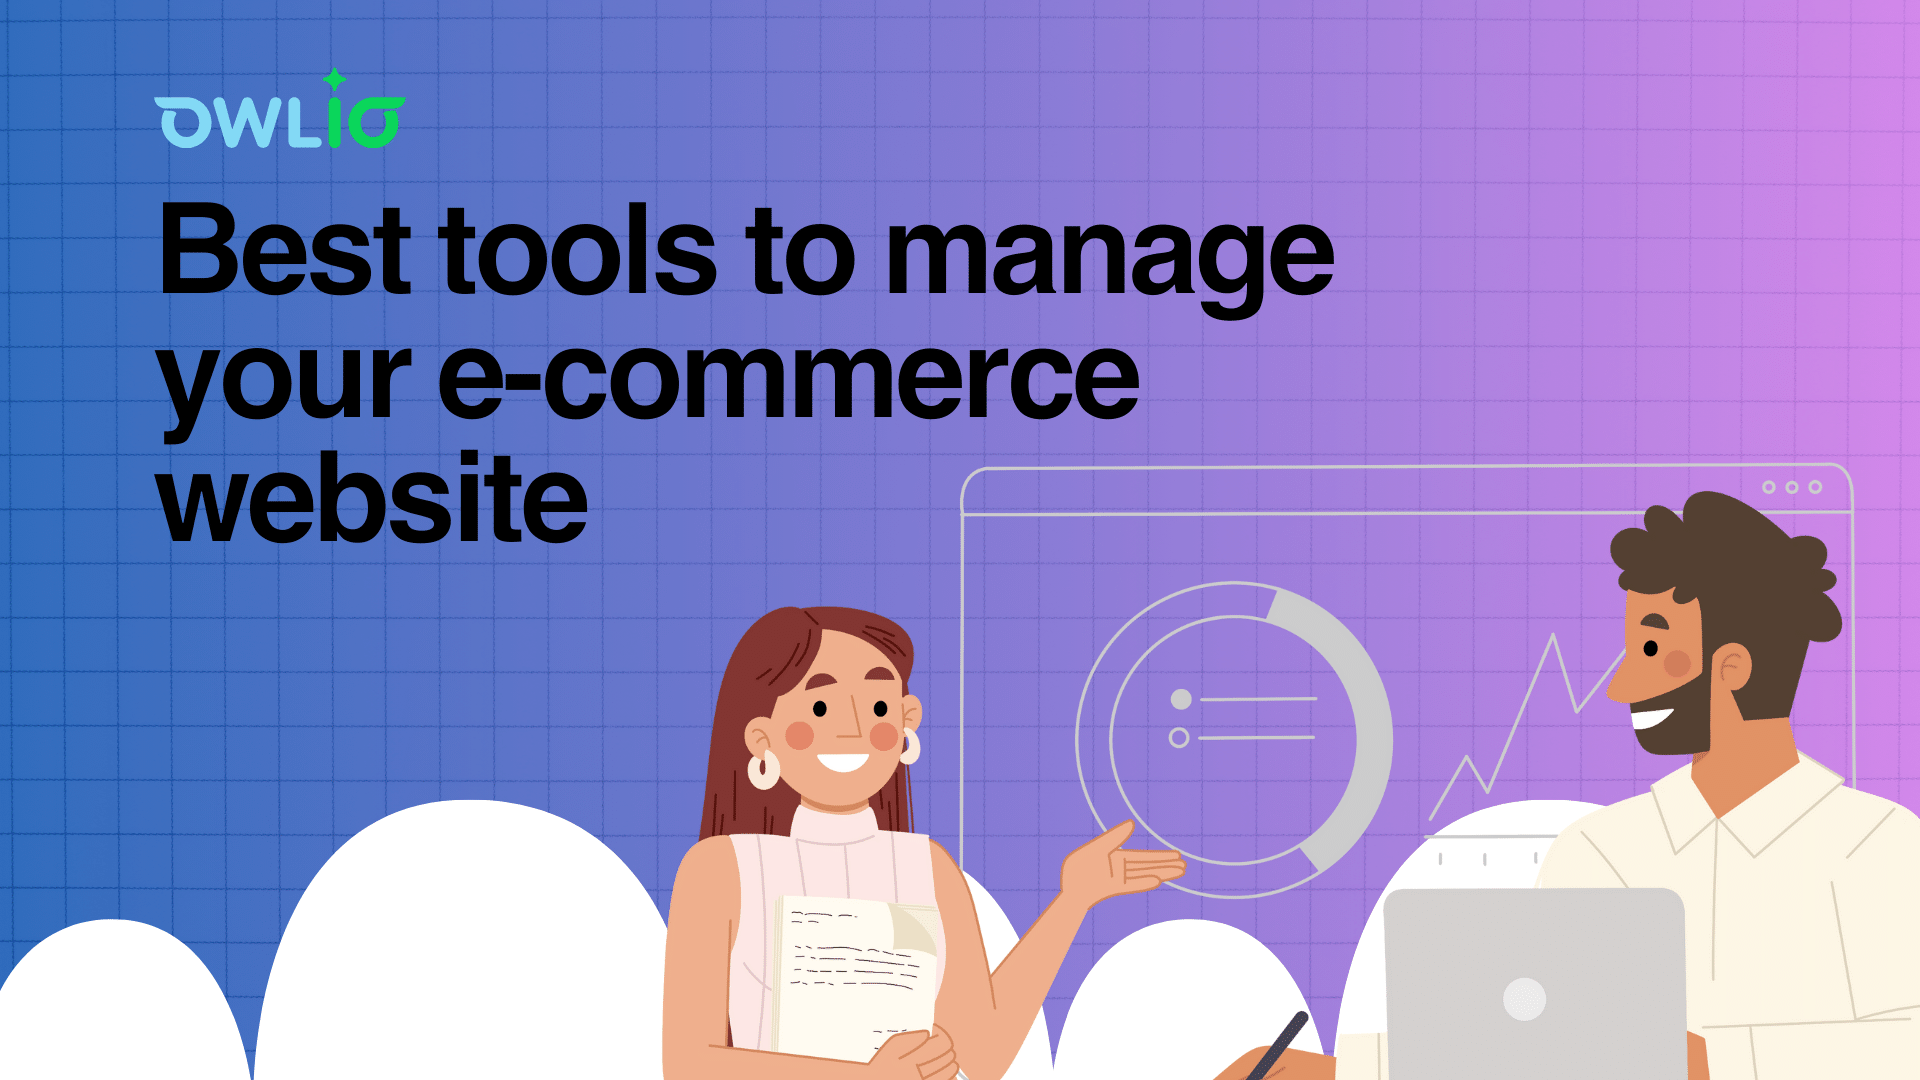 Best tools to manage your e-commerce website